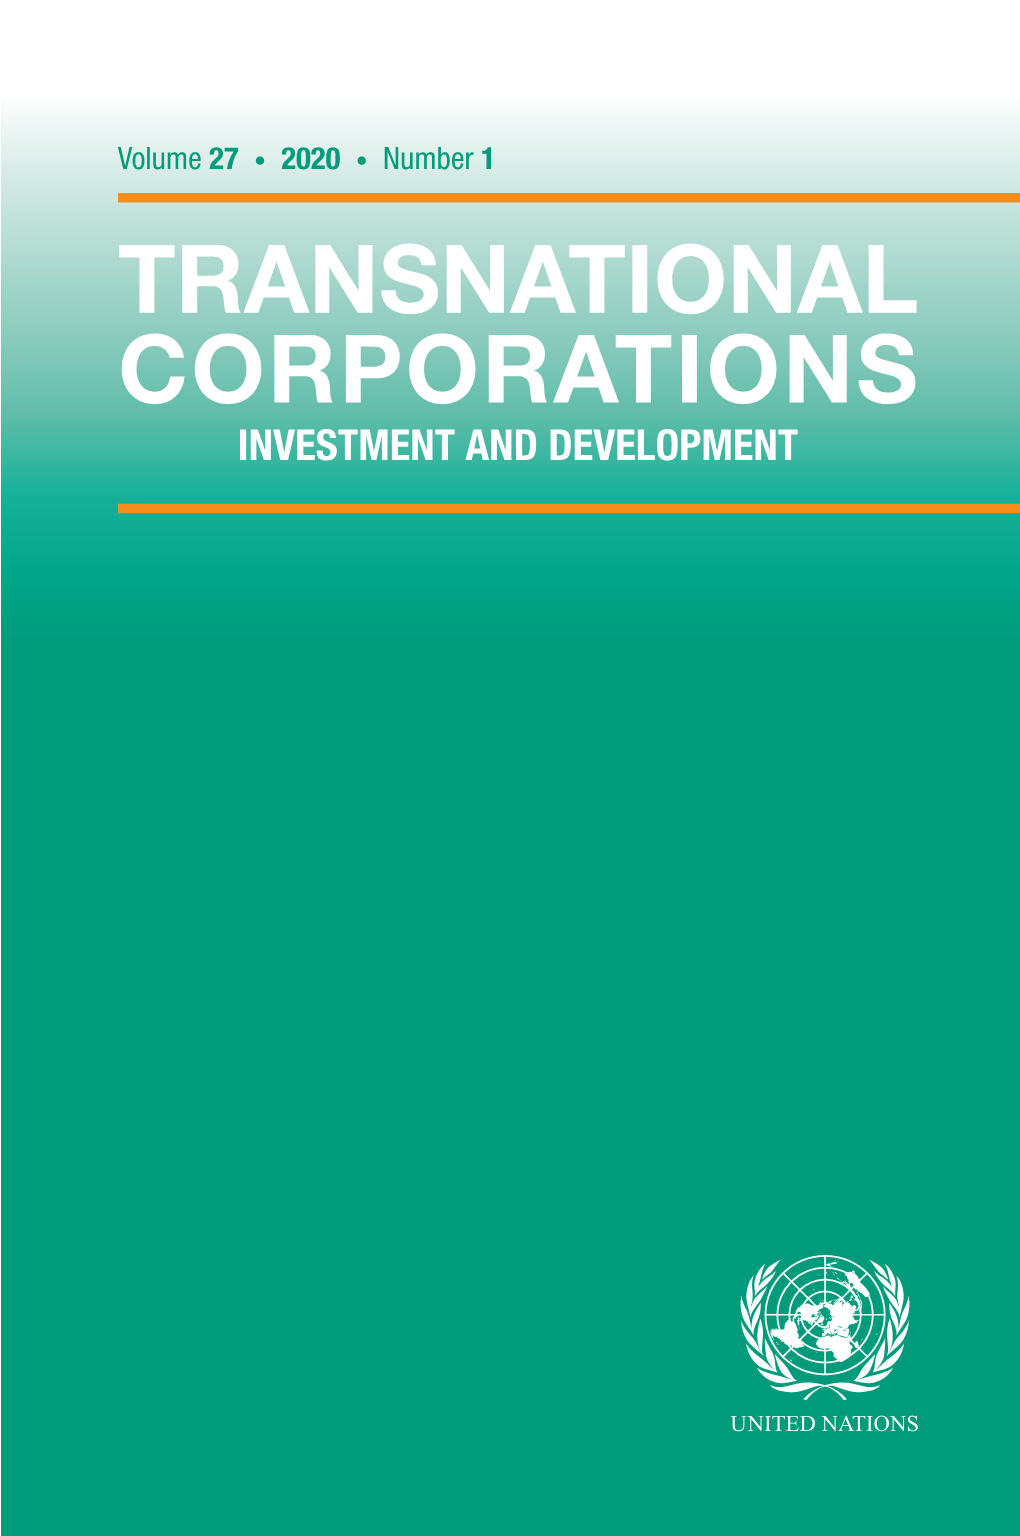 TRANSNATIONAL CORPORATIONS Volume 27, 2020, Number 1